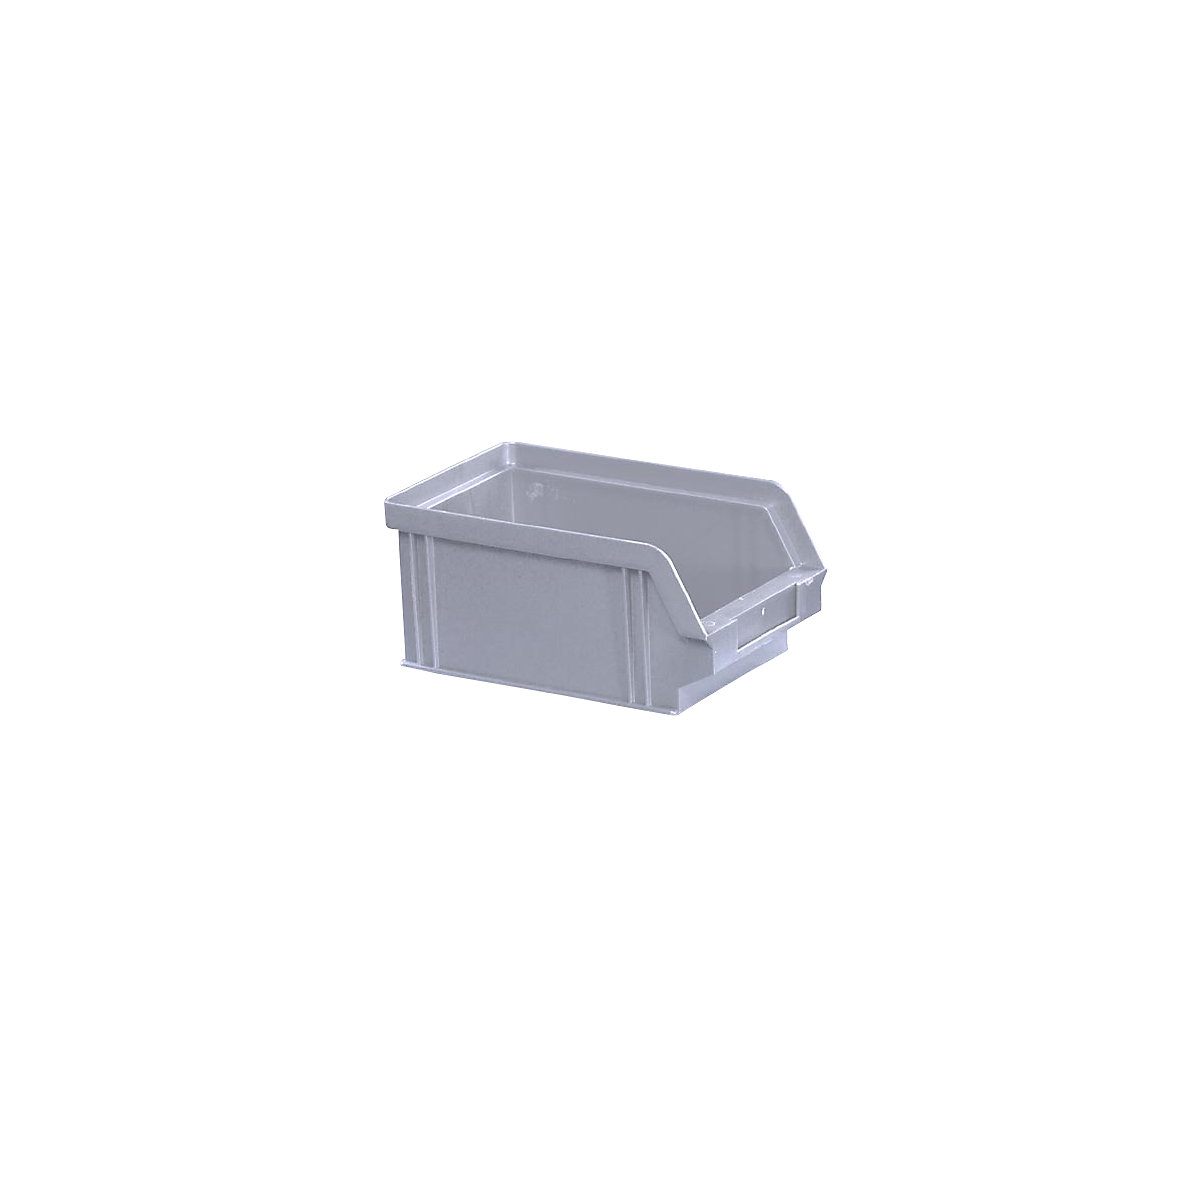 Open fronted storage bin made of polystyrene, LxWxH 160 x 102 x 75 mm, pack of 32, grey-7